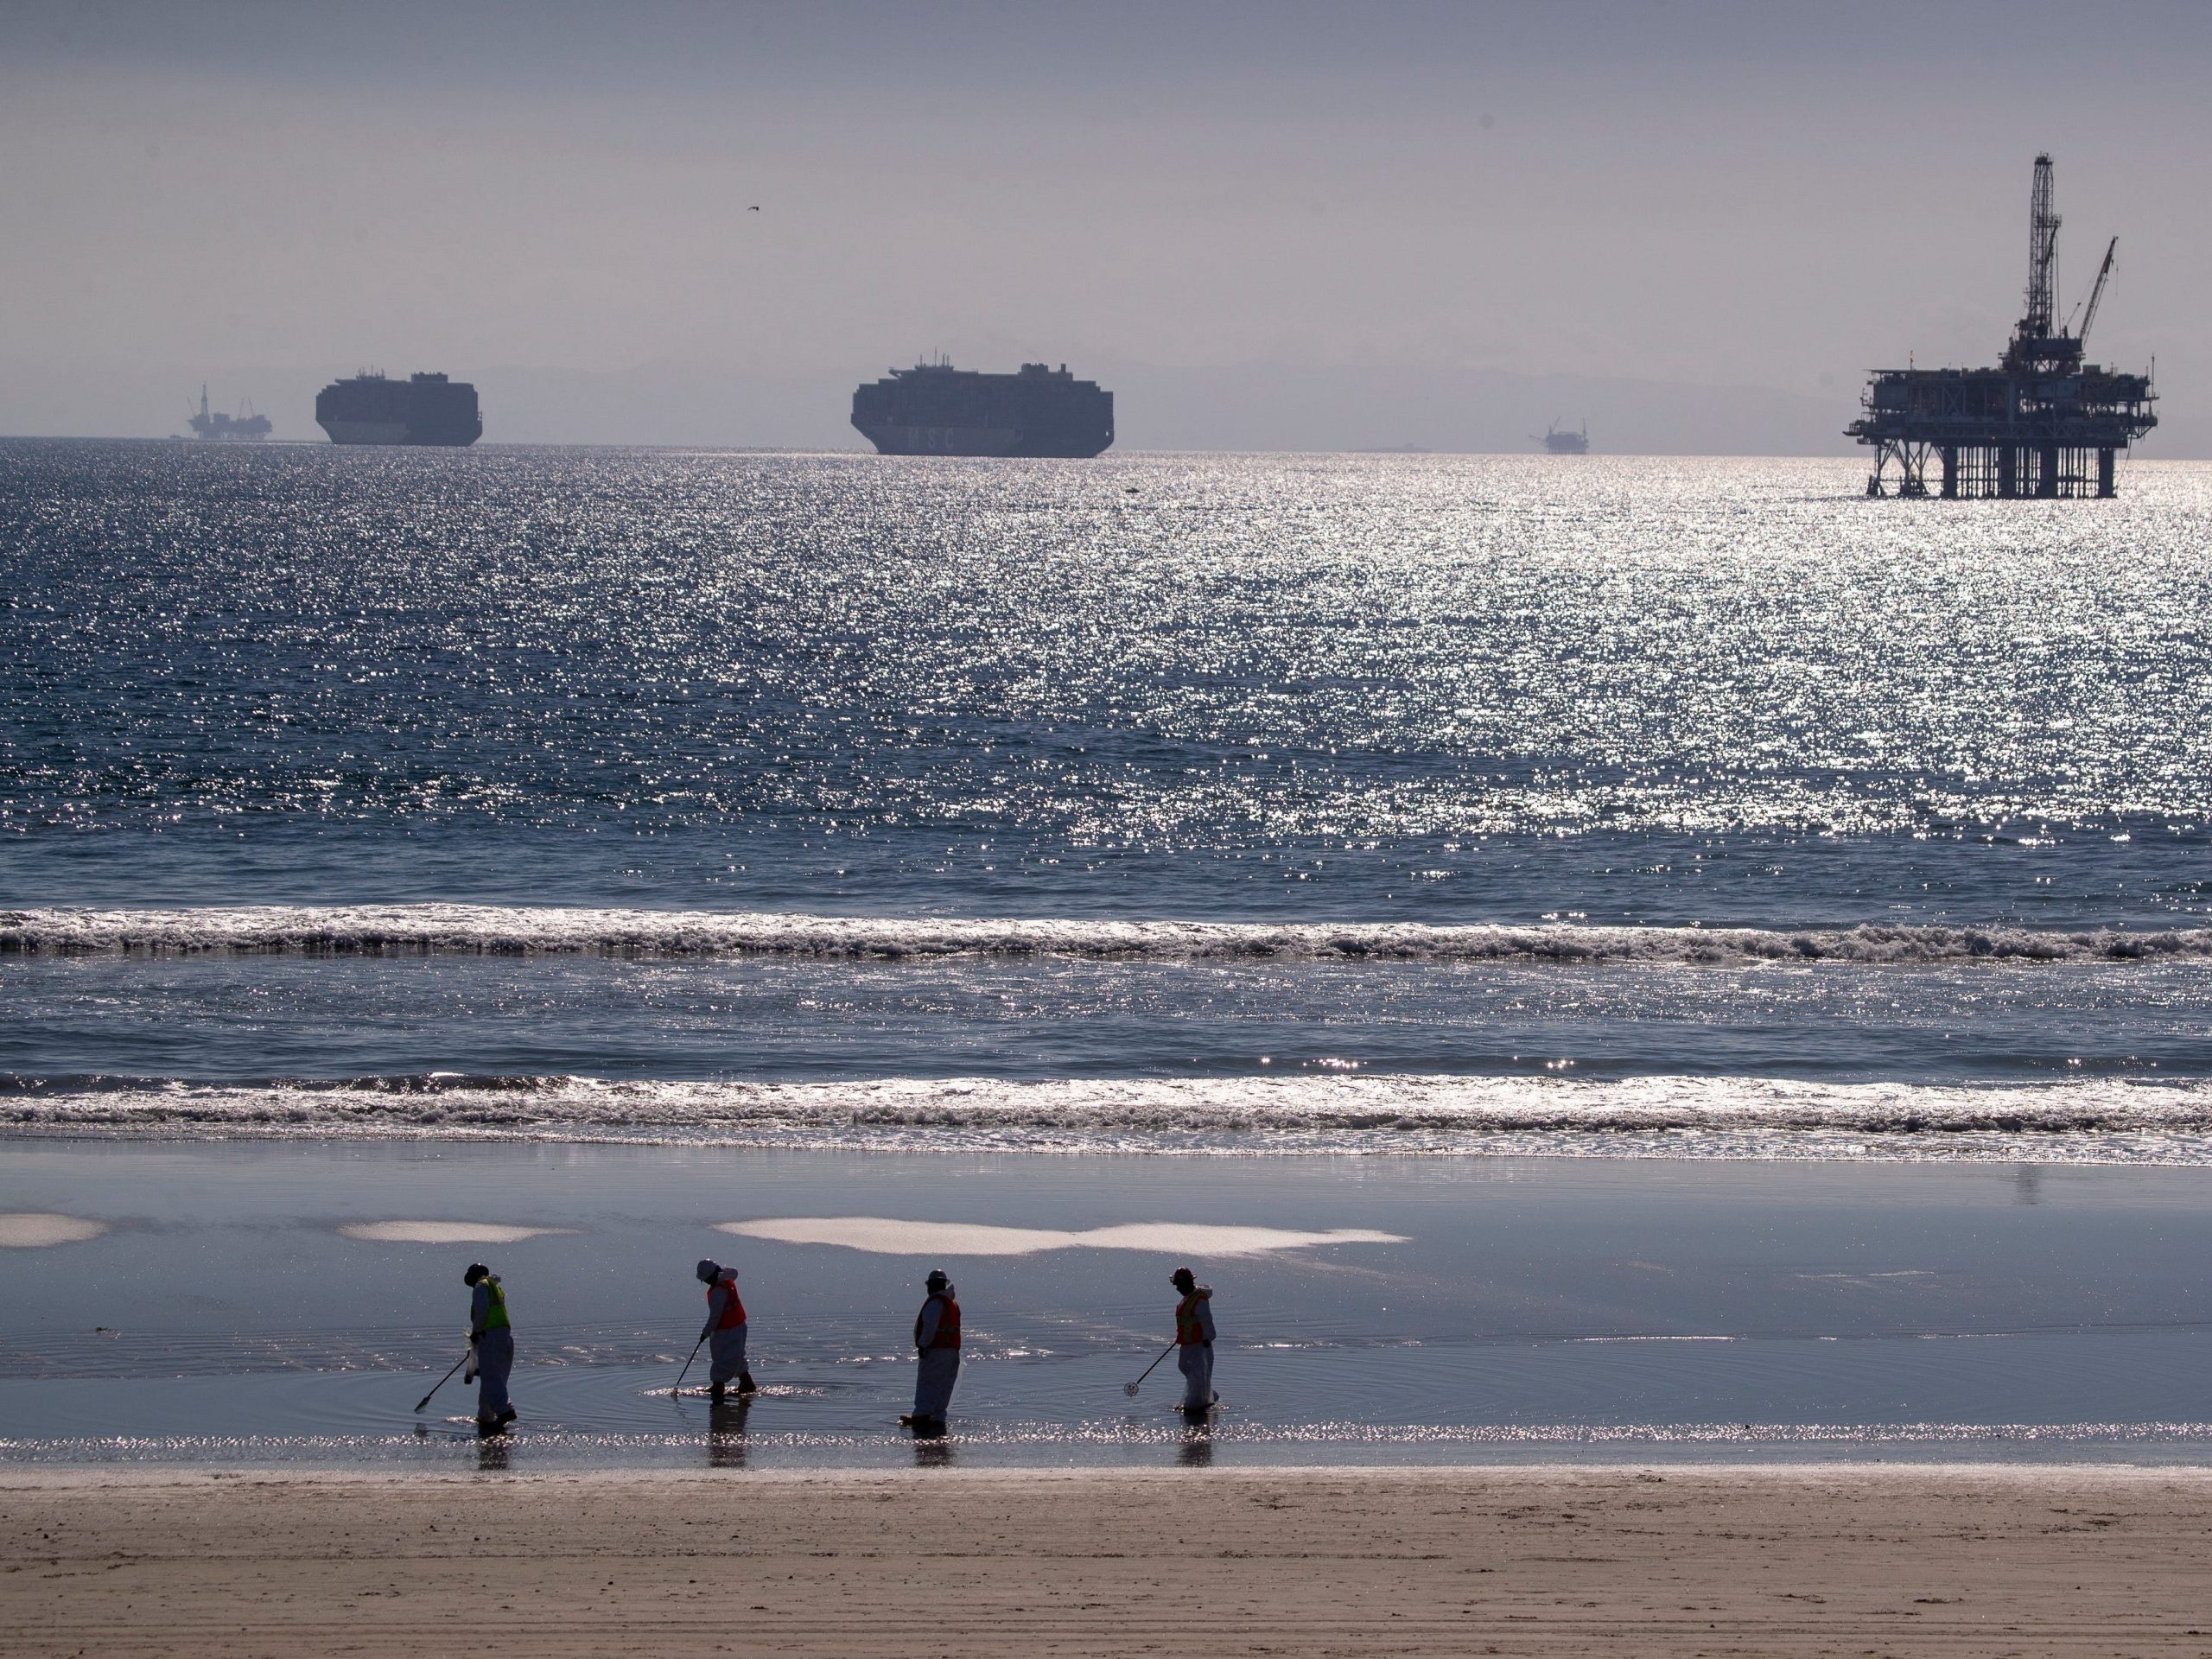 Workers clean a beach with an oil drilling platform in the background.